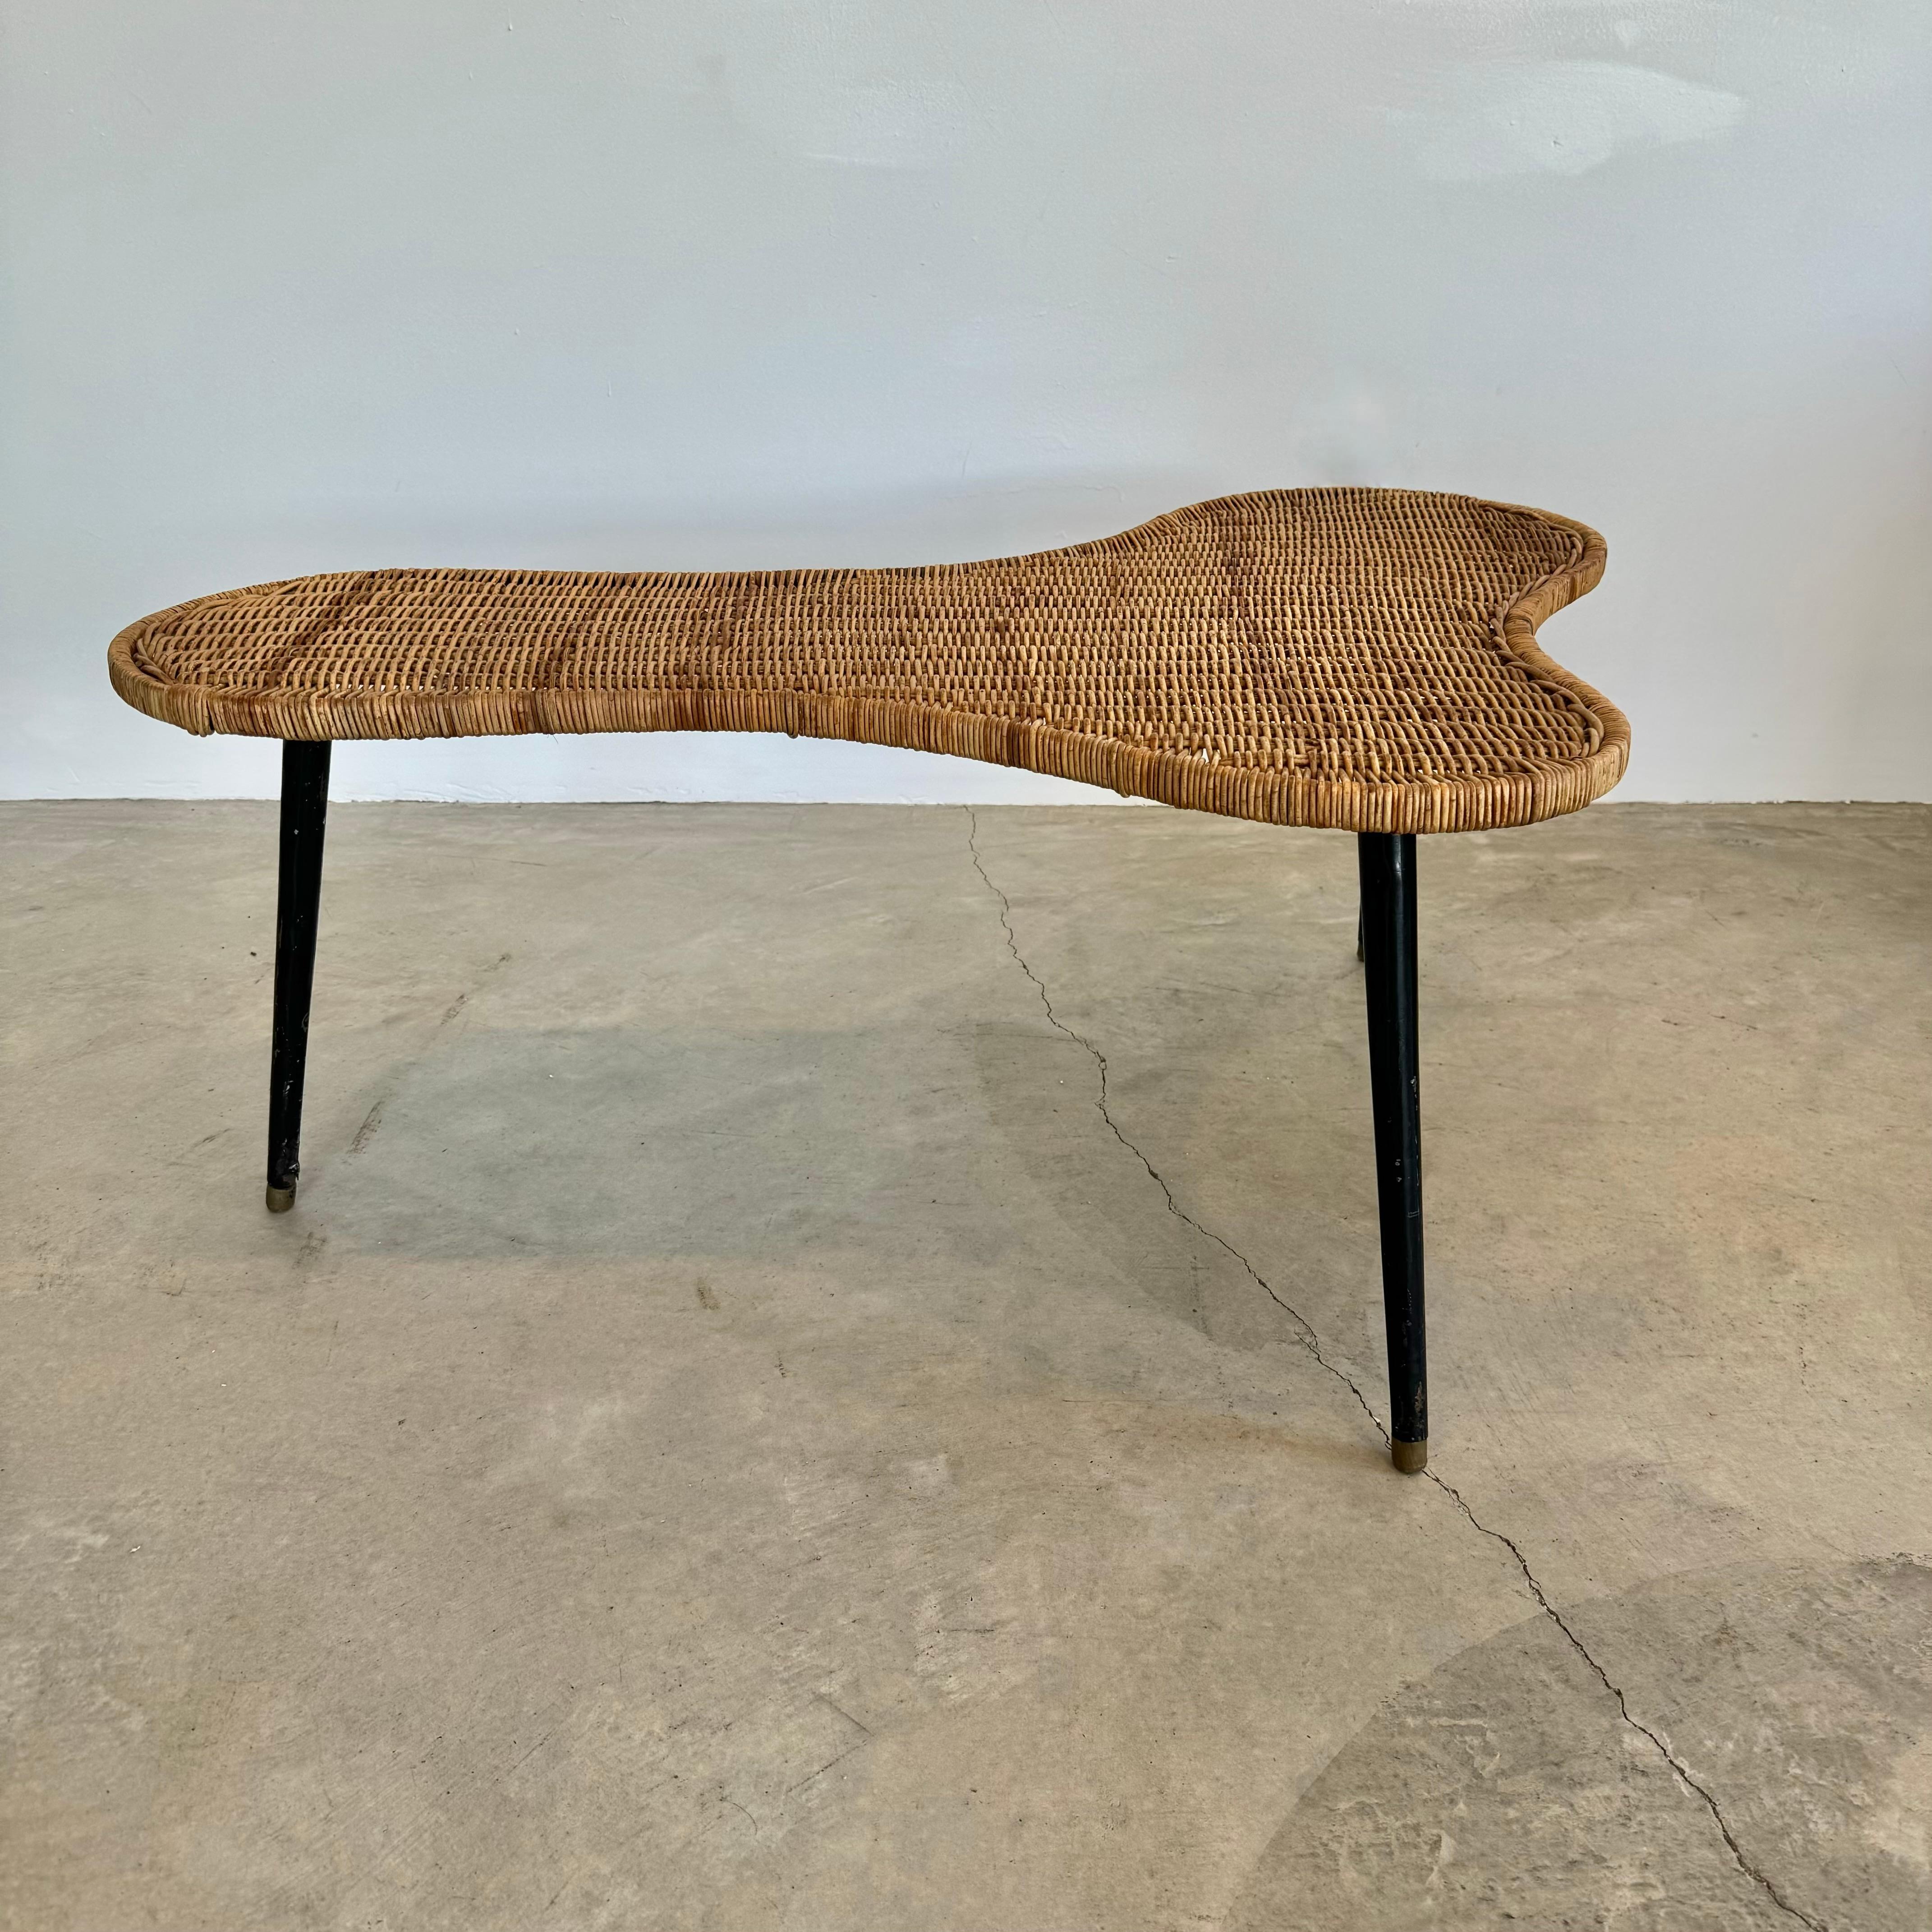 Biomorphic Wicker and Iron Coffee Table, 1950s France For Sale 5